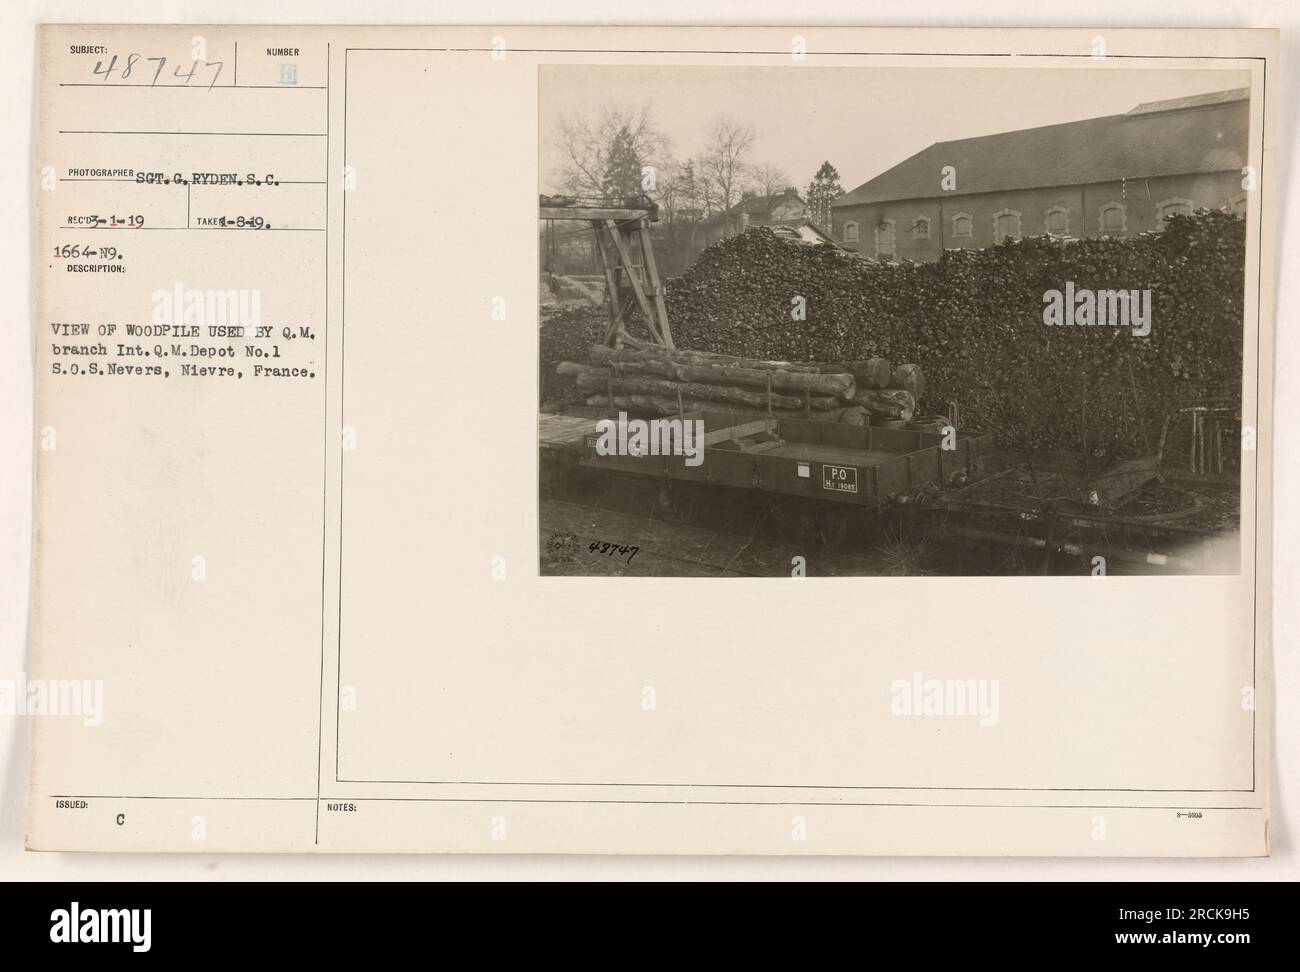 Image depicting a woodpile at Int. Q. M. Depot No. 1, S.O.S. Nevers, Nievre, France. The woodpile is used by the Q.M. branch. Photograph taken by S.C. Eco on January 19th, 1919. Image reference number: 18747. Stock Photo